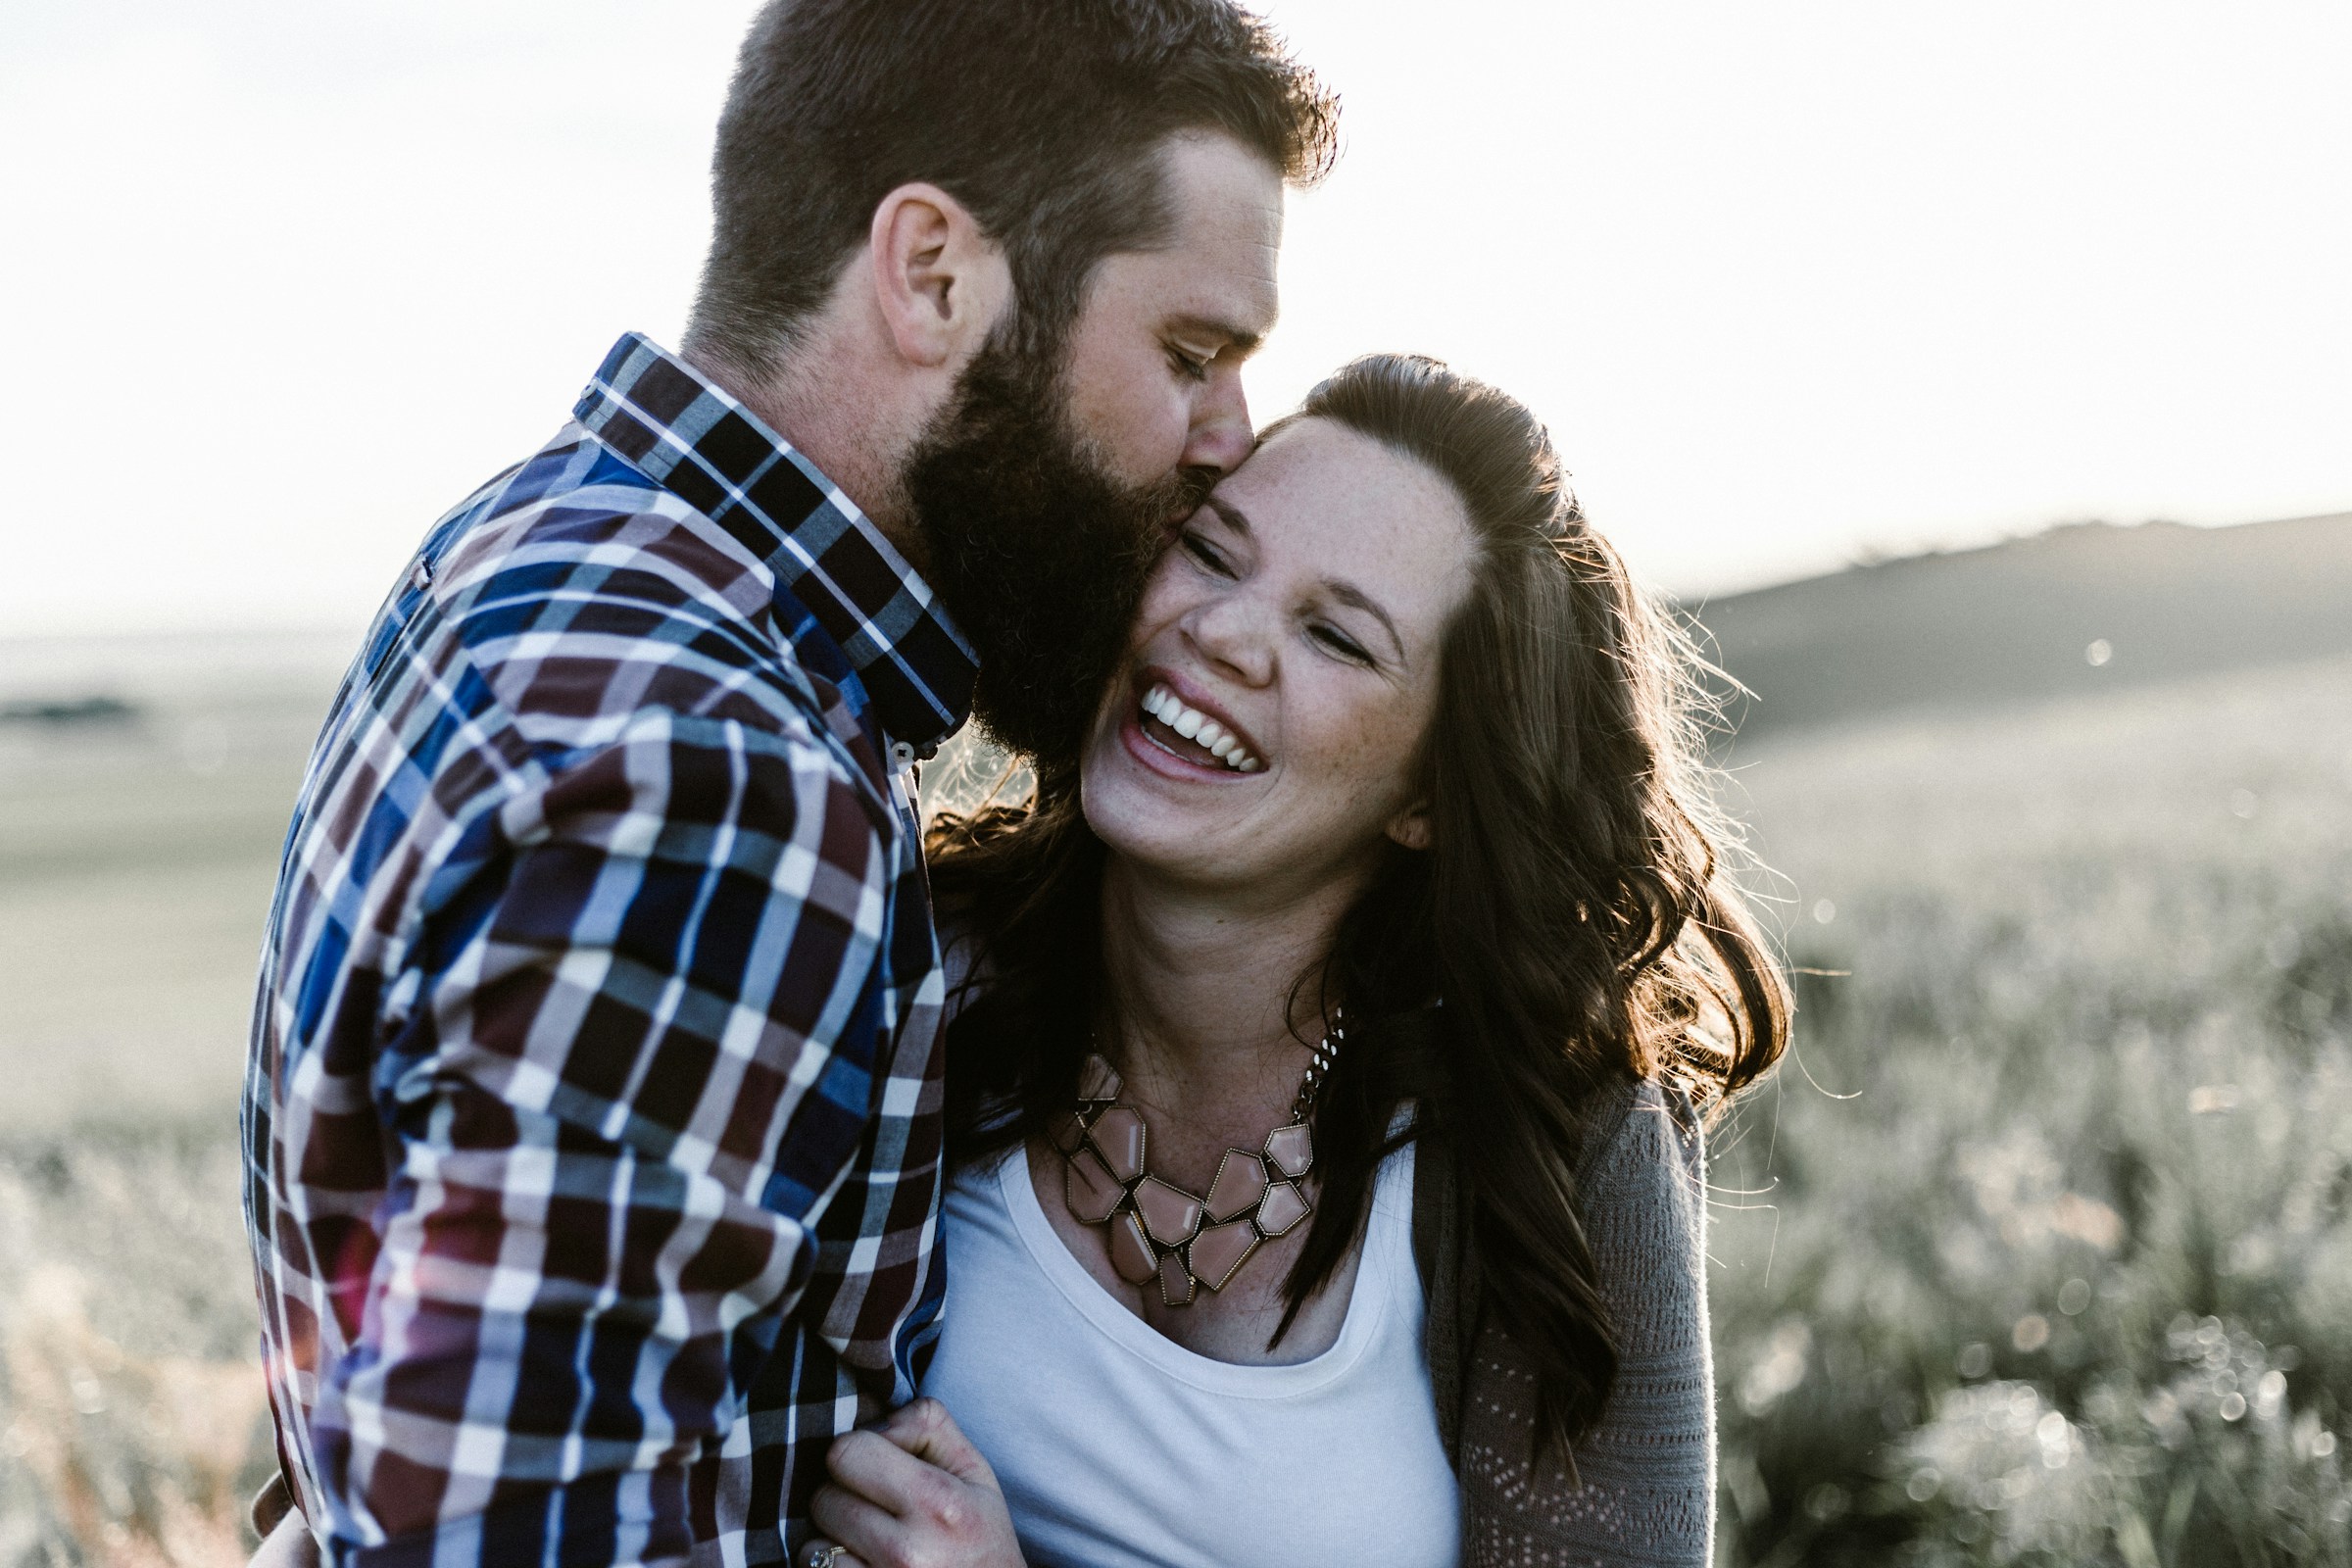 A husband kissing his wife on the cheek | Source: Unsplash